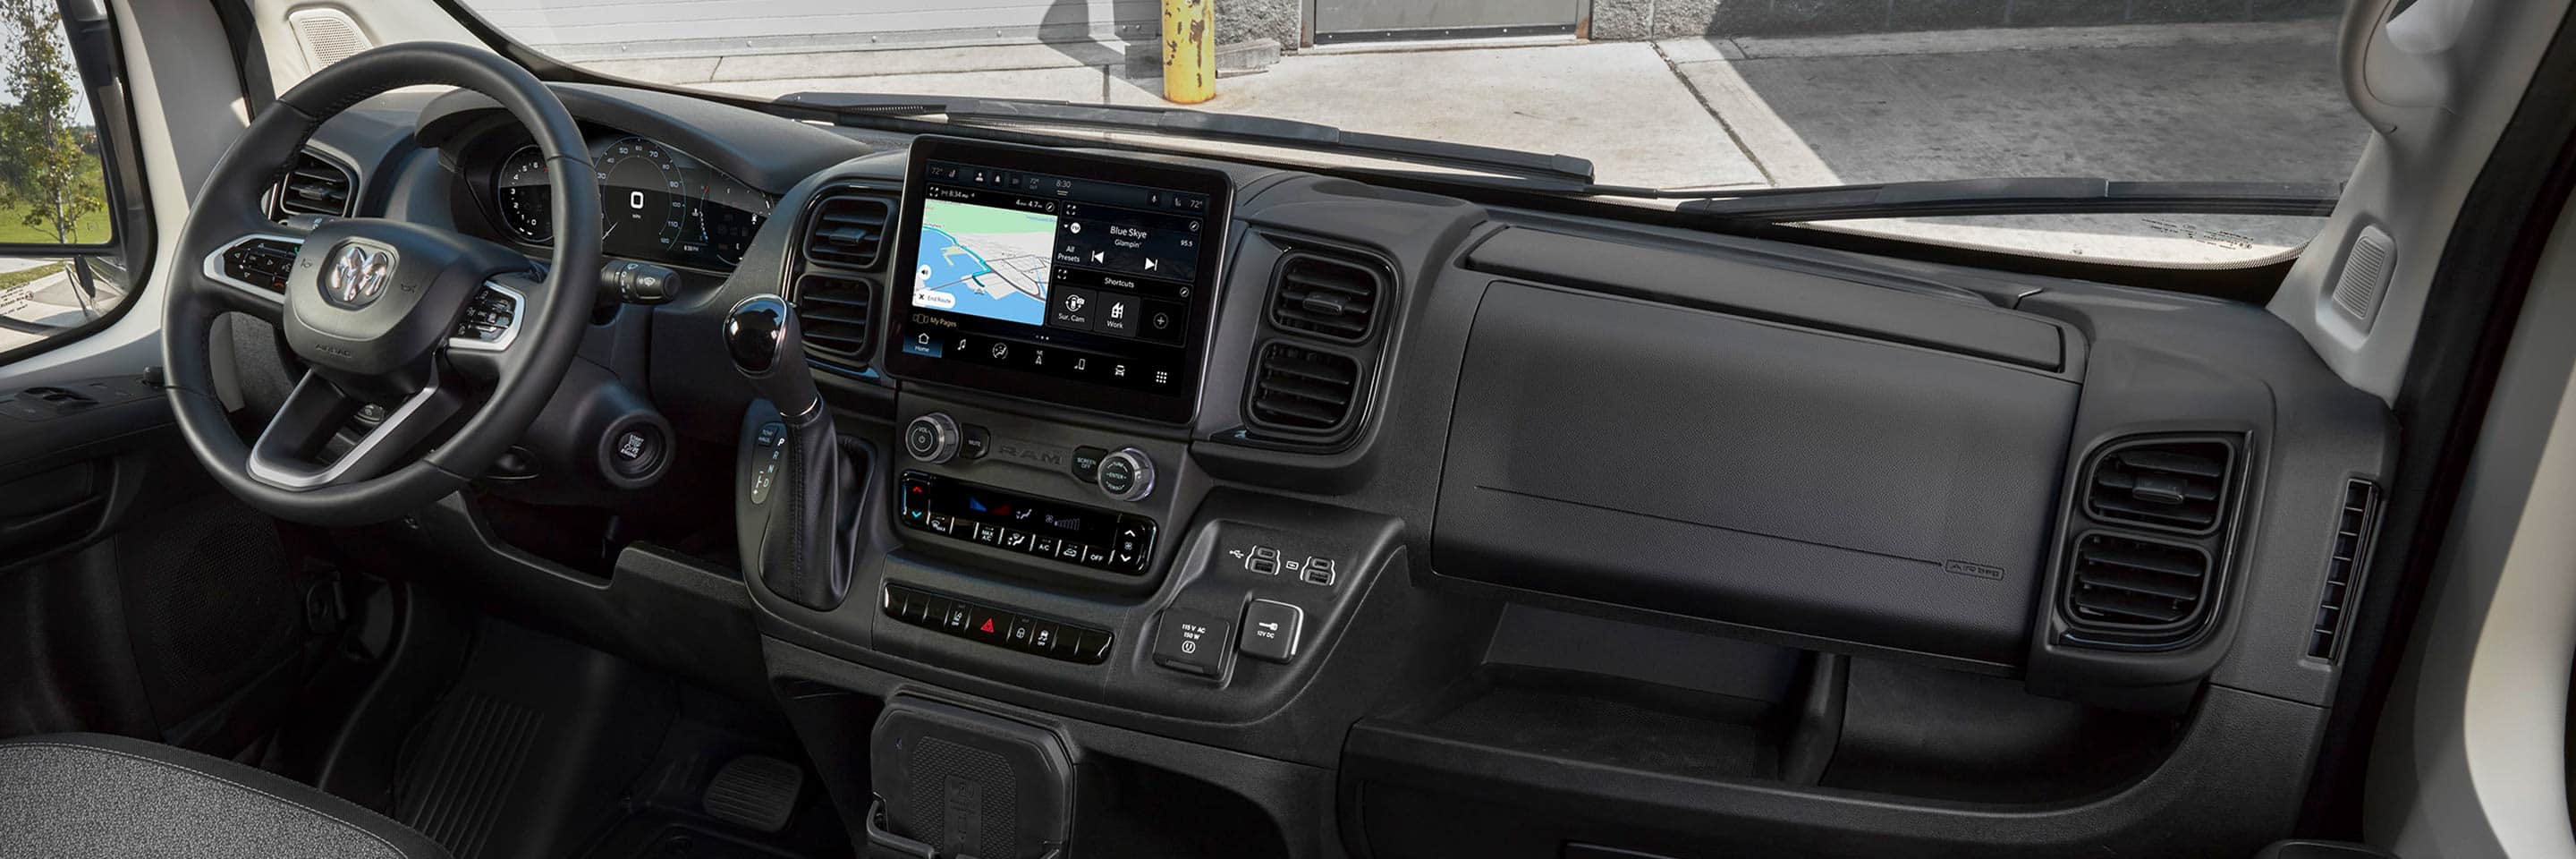 The interior of the 2022 Ram ProMaster, focusing on the steering wheel, dashboard and Uconnect touchscreen displaying a route map.